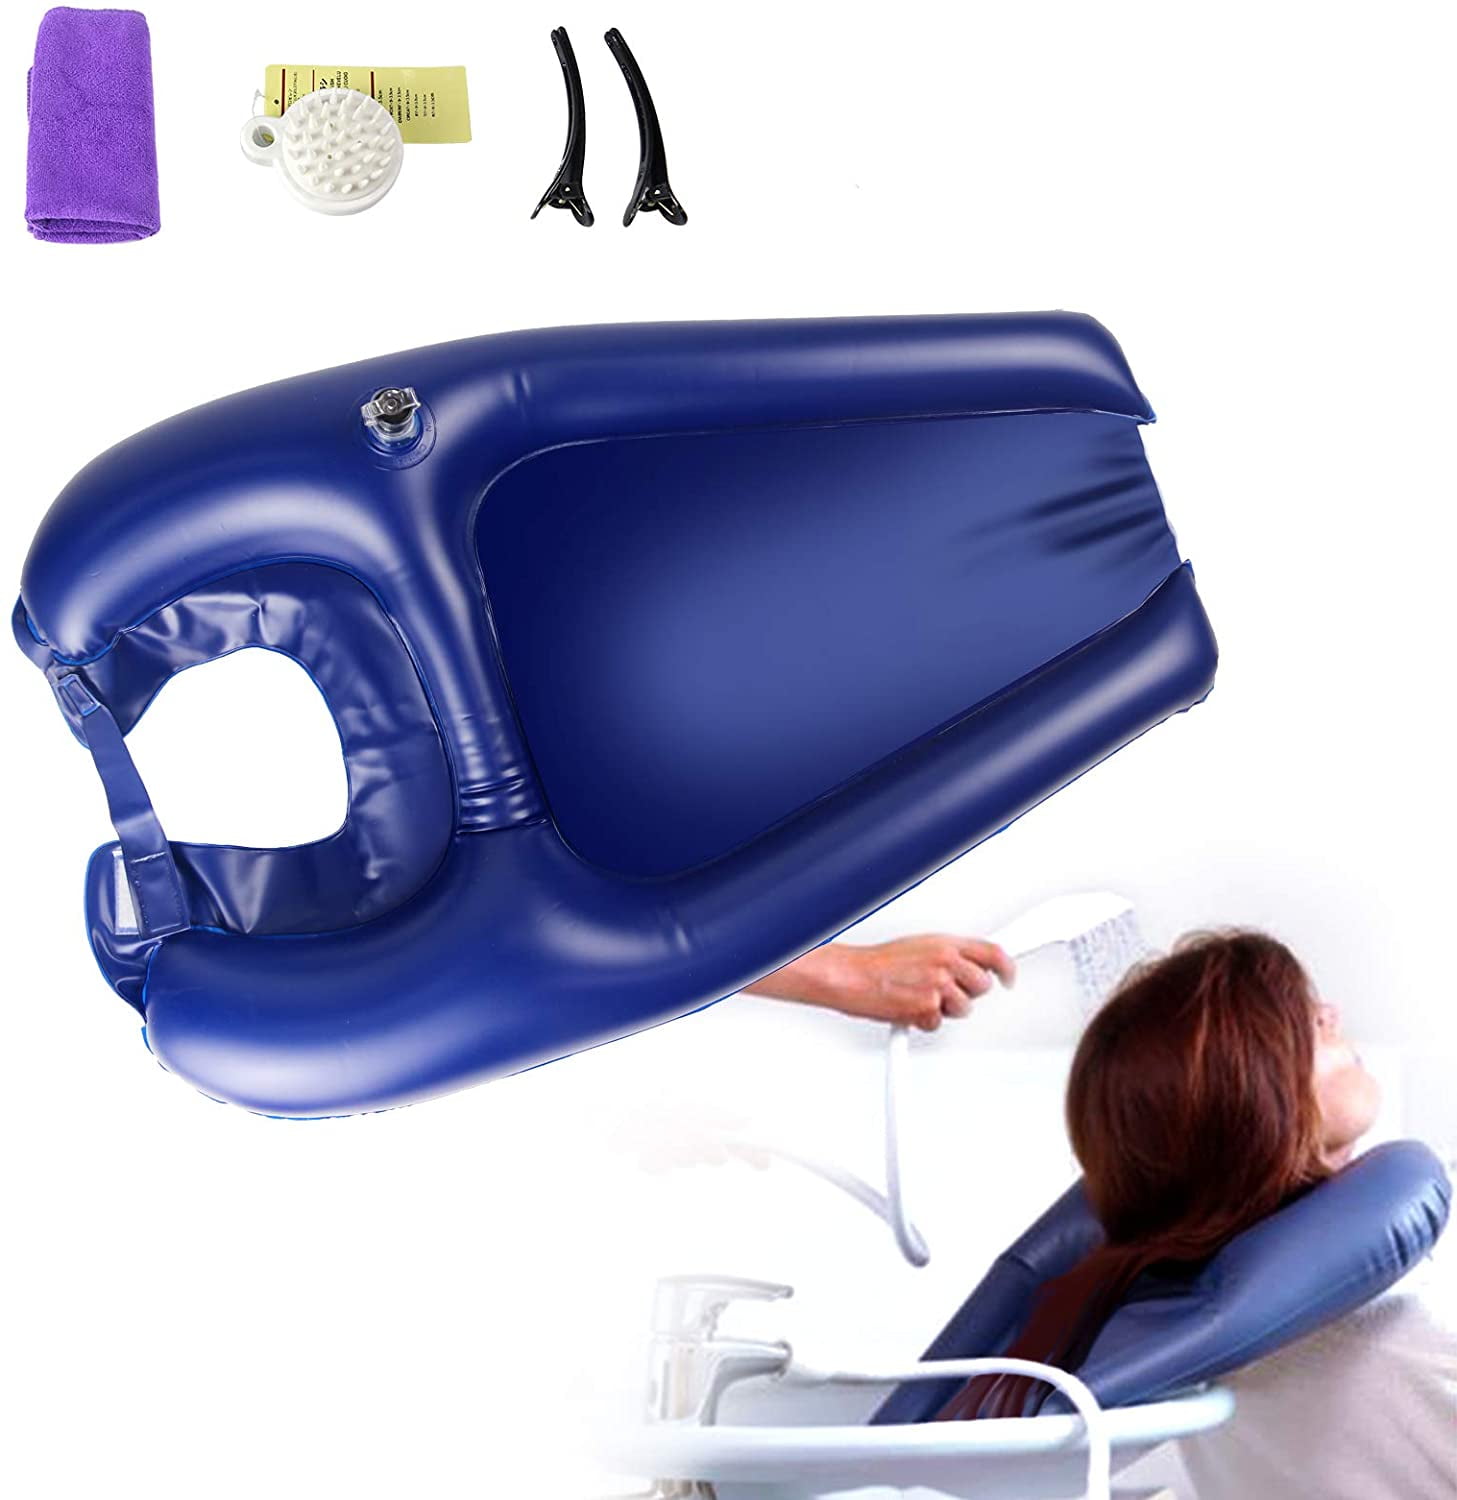 Inflatable Hair Washing Basin for Sink at Home, Portable Shampoo Bowl, Hair  Washing Sink for Bedridden, Handicapped, Kids, Seniors, Pregnant,  Wheelchair Person at Bedside and Kitchen Sink Use (Blue) 